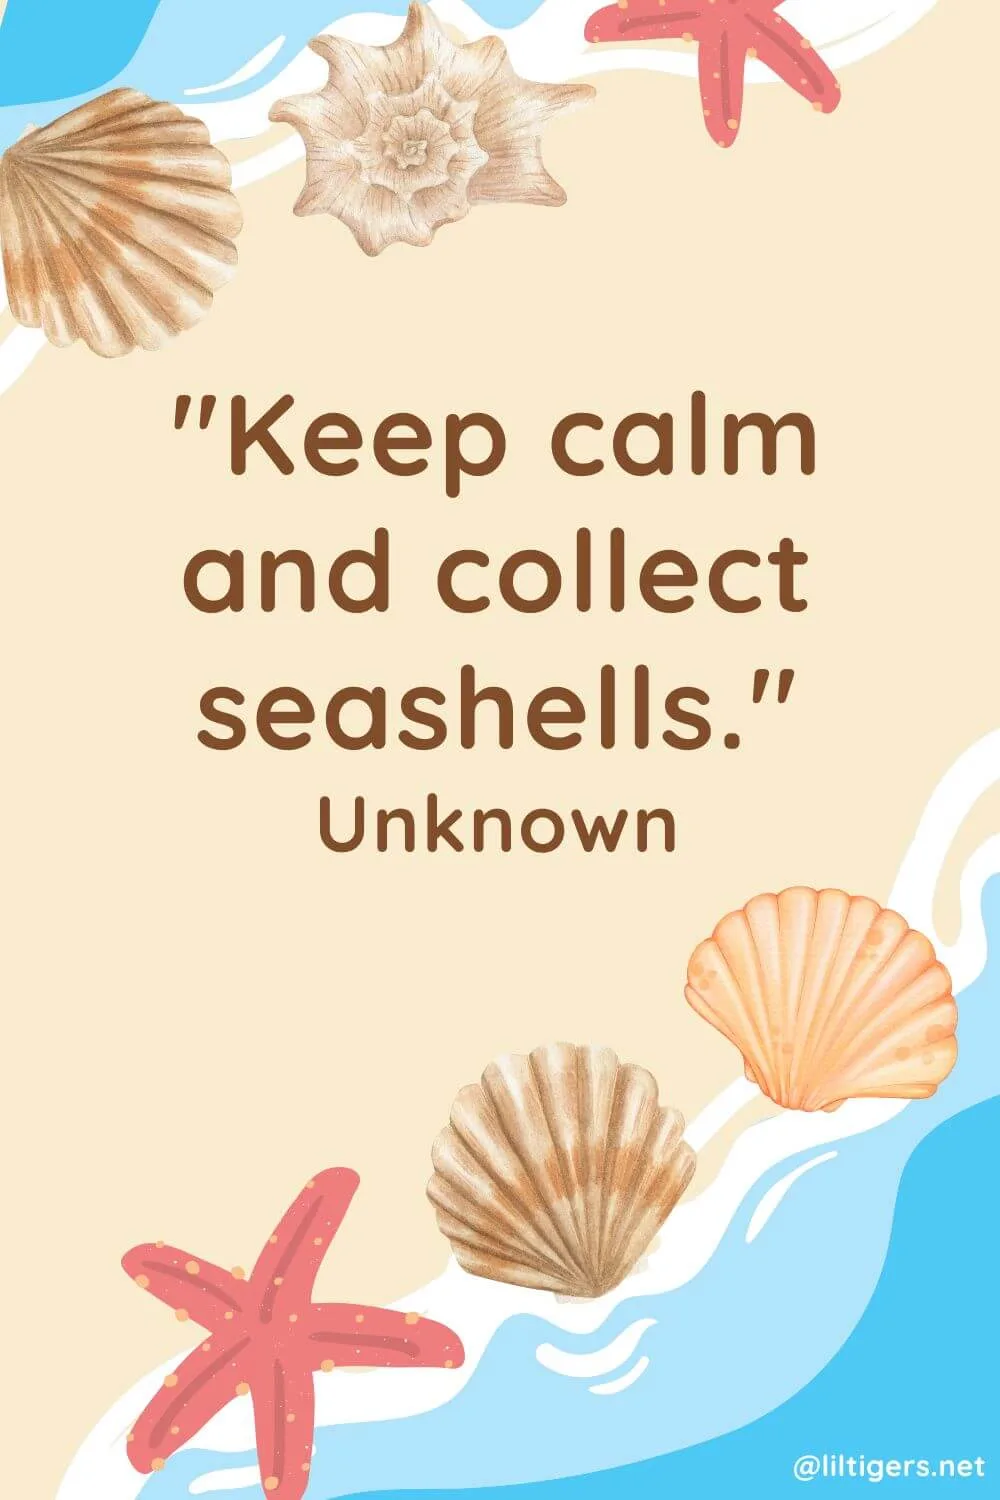 Top Seashell Quotes for Kids